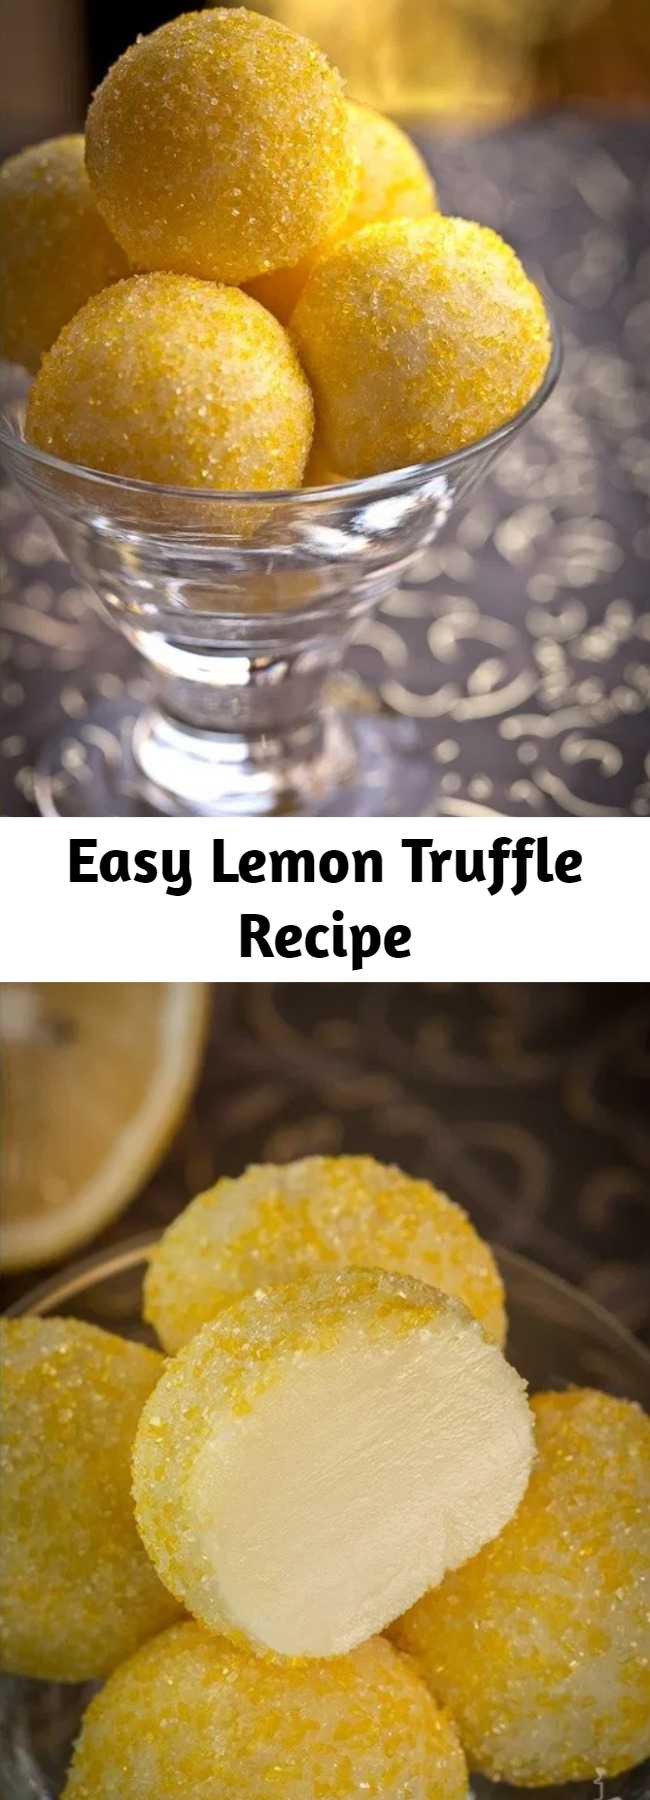 Easy Lemon Truffle Recipe - Lemon Truffles are made with just a couple of ingredients and are super easy to put together. If you love lemon, these little no bake dessert treats will become your favorite quick!